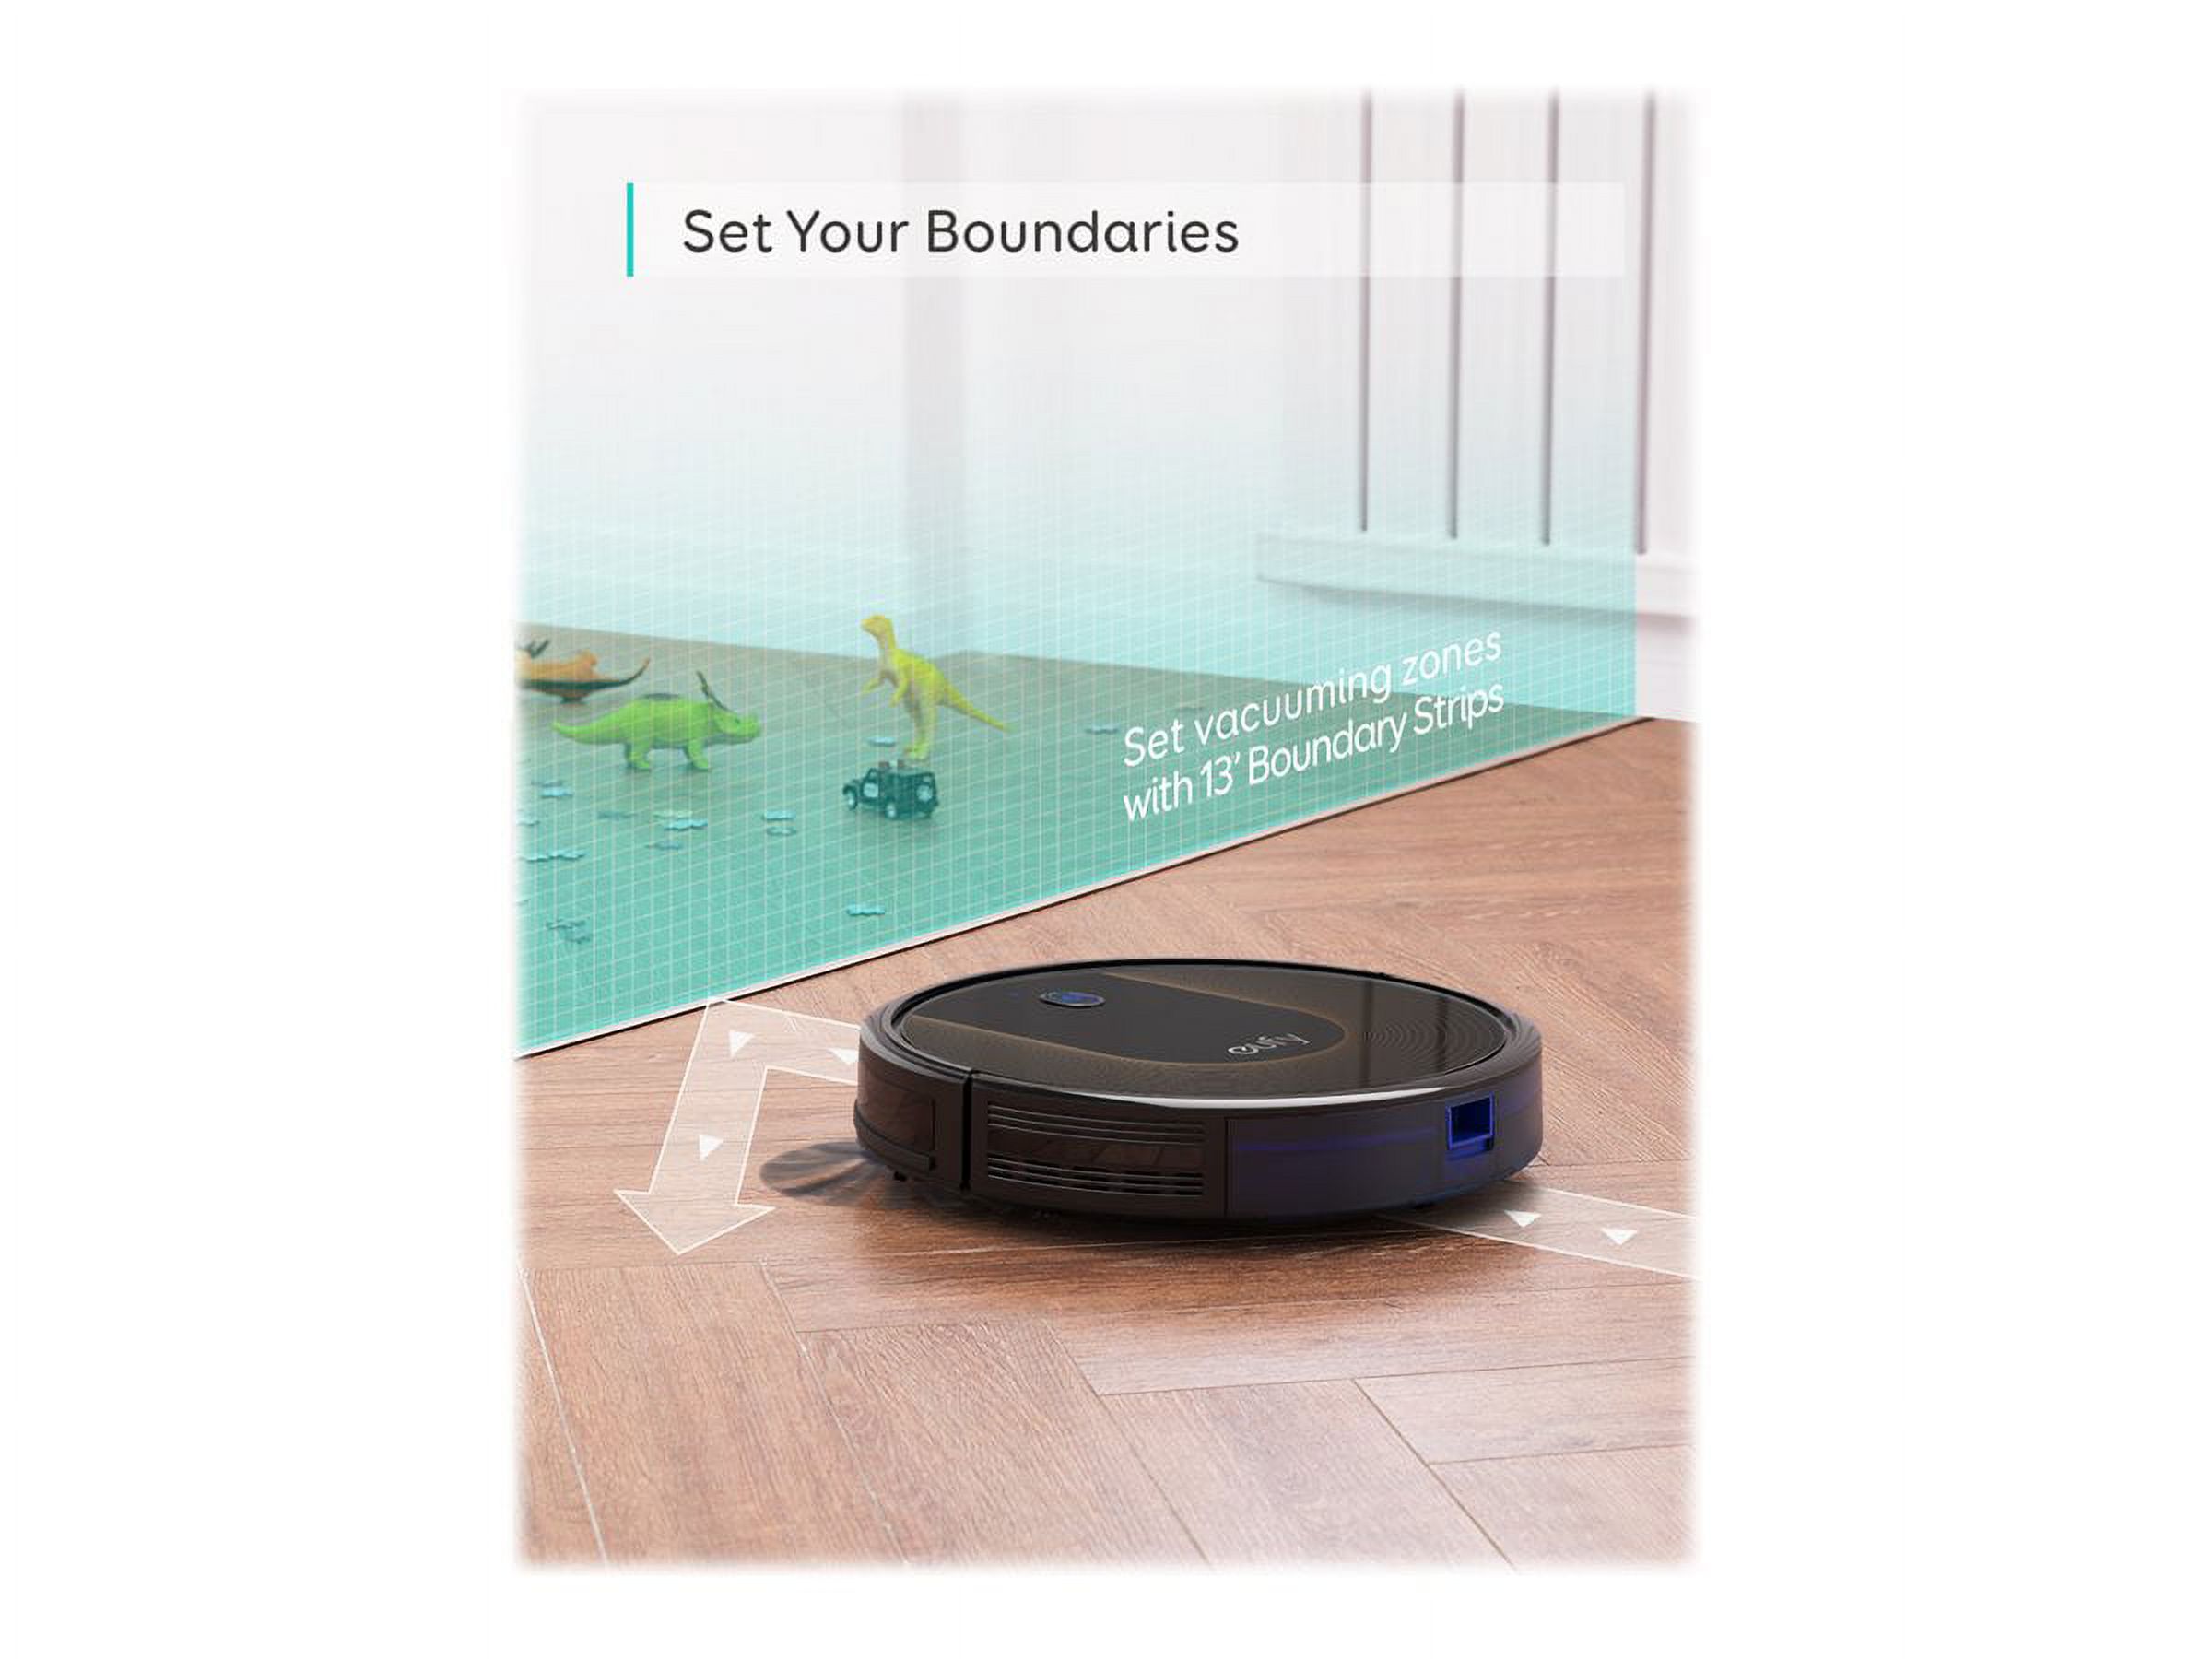 eufy [boostiq] robovac 30c, robot vacuum cleaner, wi-fi, super-thin, 1500pa suction, boundary strips included, quiet, self-charging robotic vacuum cleaner, cleans hard floors to medium-pile carpets - image 2 of 6